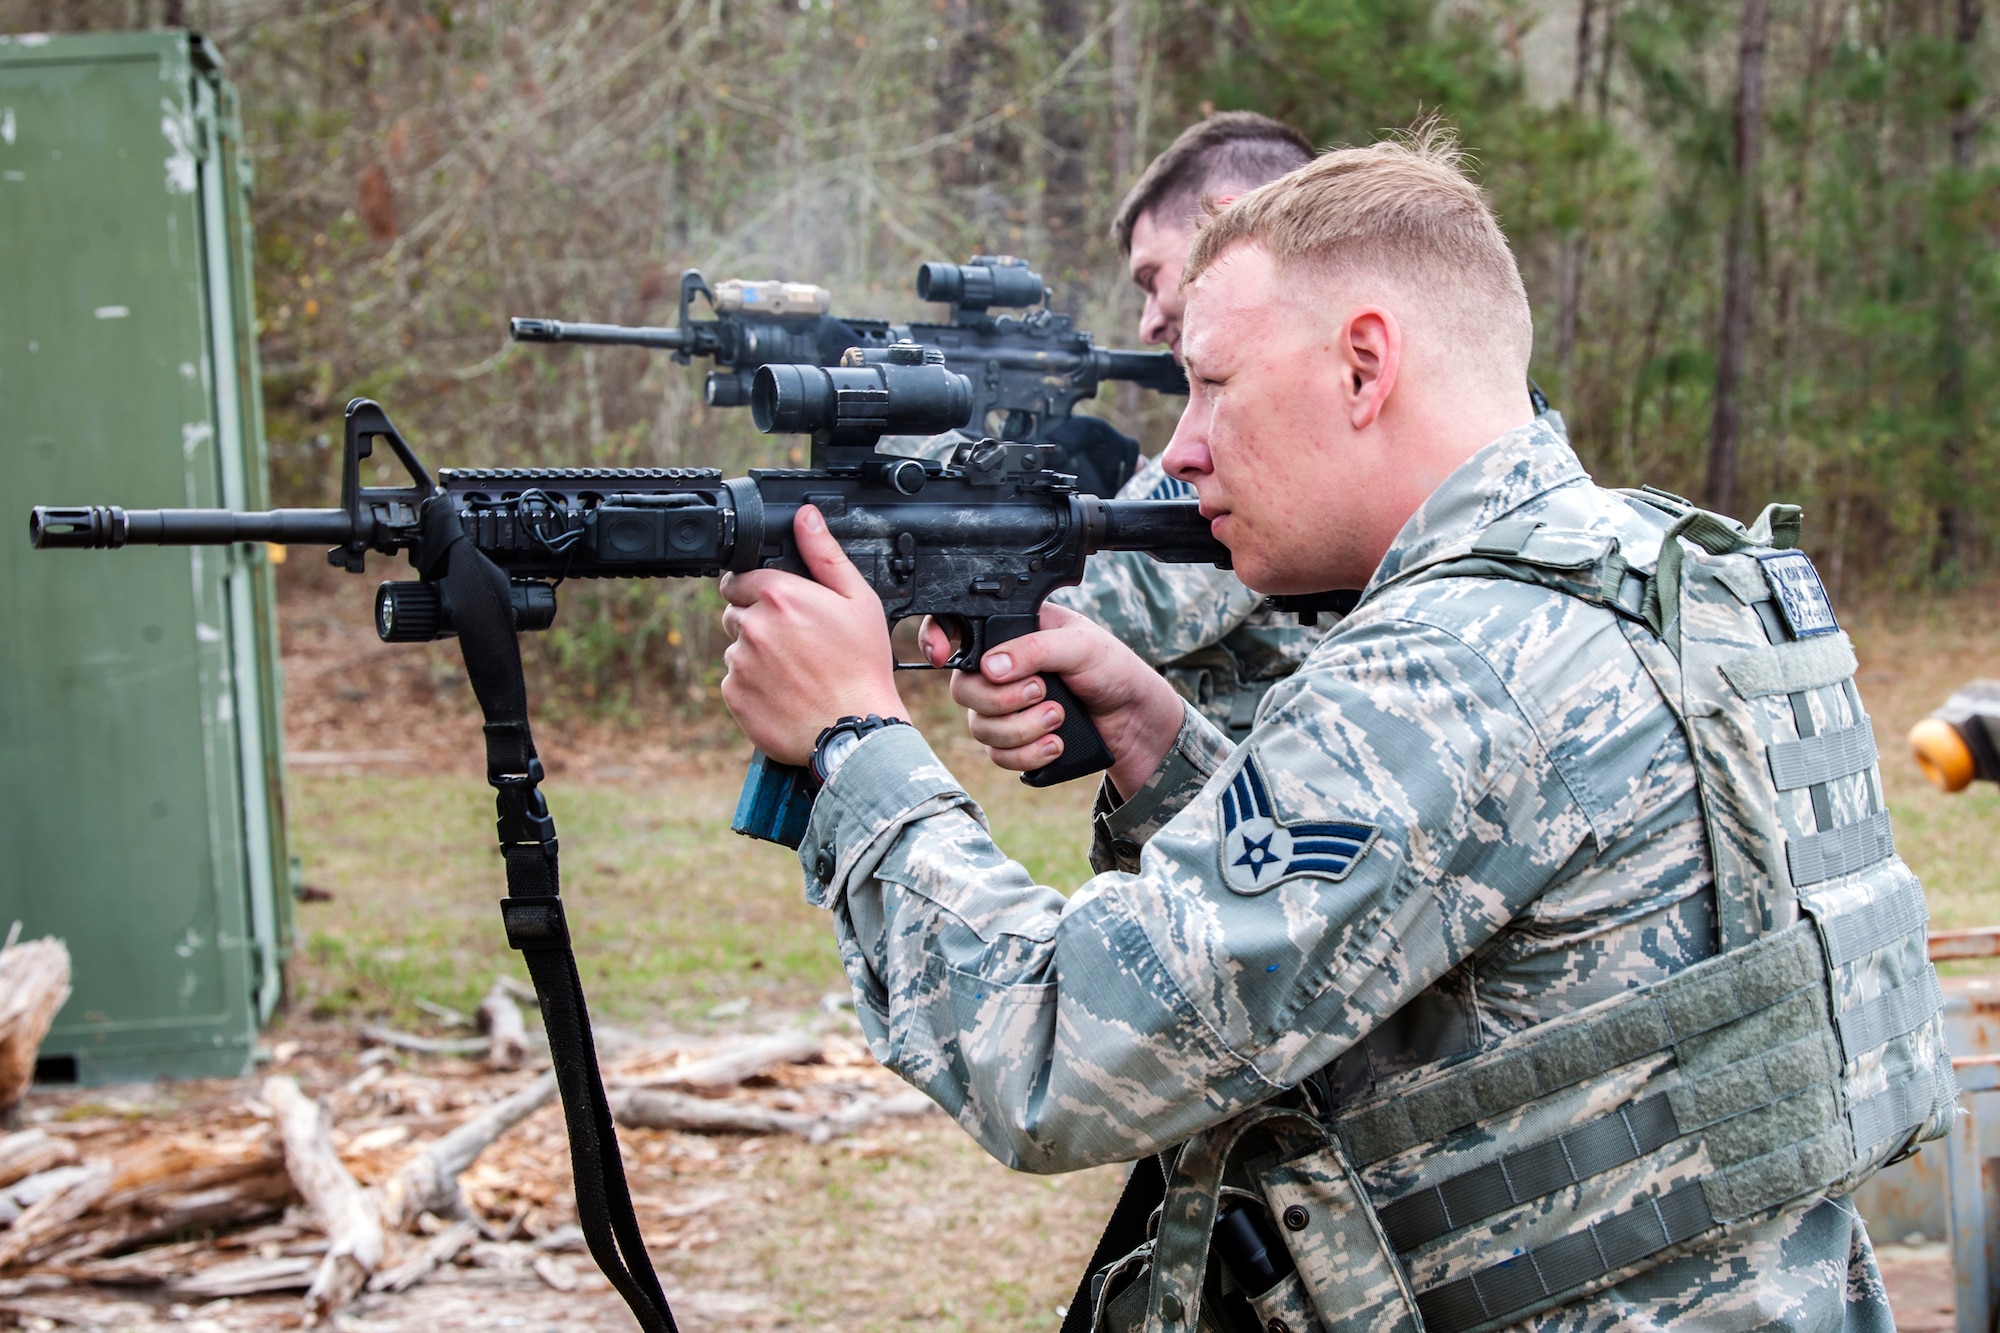 Senior Airman Adam Irwin, front, 23d Security Forces Squadron installation patrolman, and Tech Sgt. Stephen O’Hara, 23d Security Forces Squadron flight chief, fire M4 carbines after a training event, Feb. 22, 2018, at Moody Air Force Base, Ga.  The Shoot, move, communicate training event is designed to test participants on their ability to move from barricade to barricade as a team. To be successful, one member provided covering fire while others advanced on the enemy, then retreated from the scenario while they maintained cover fire. Security Forces members could employ these tactics anytime they’re under enemy fire.
(U.S. Air Force photo by Airman Eugene Oliver)